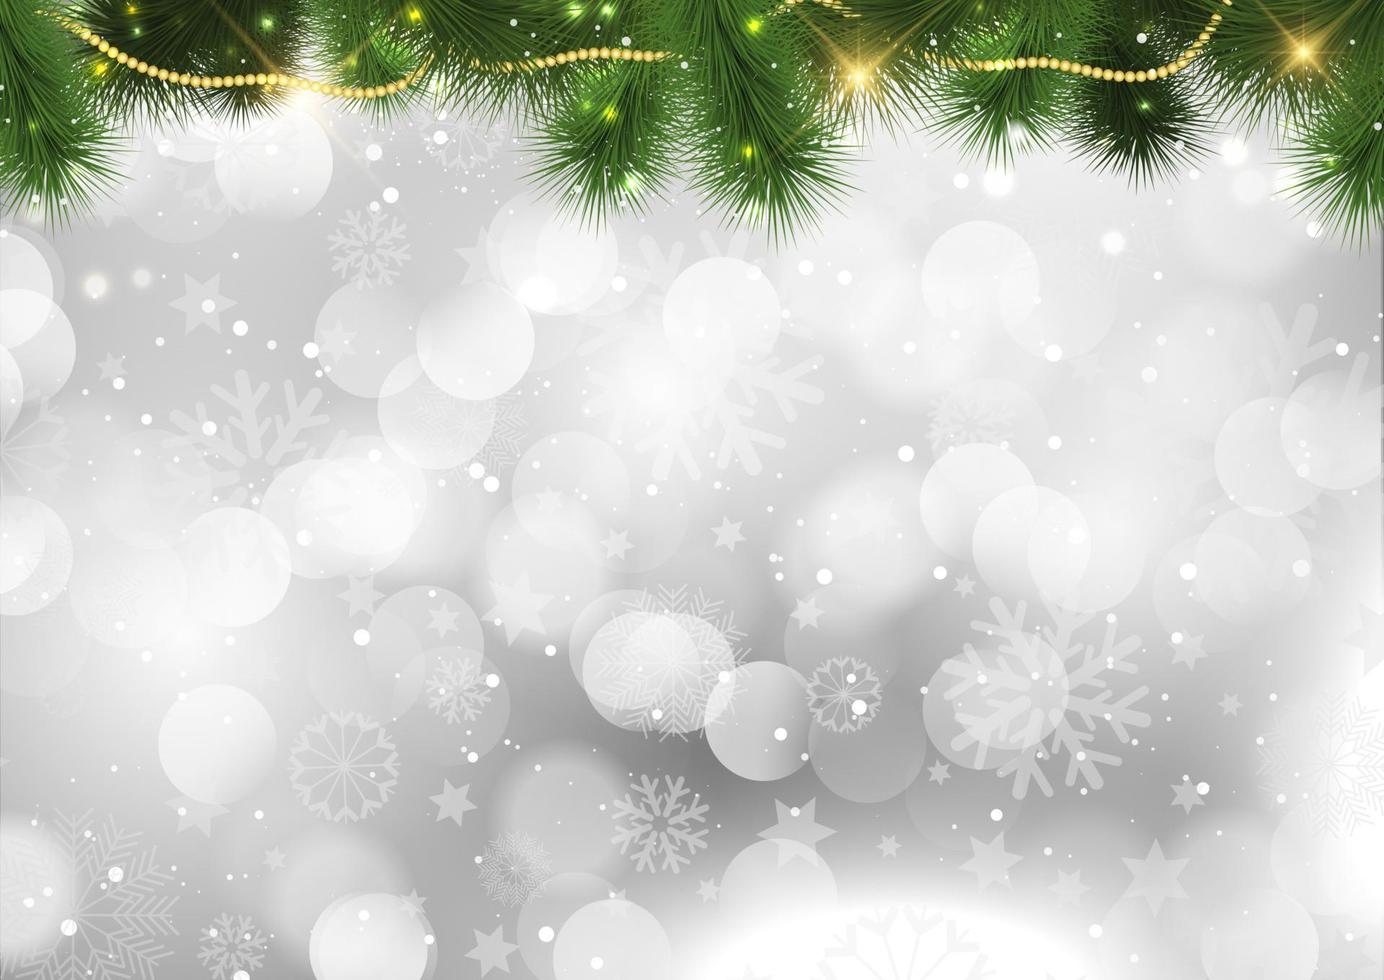 decorative christmas background with tree branches and stars vector